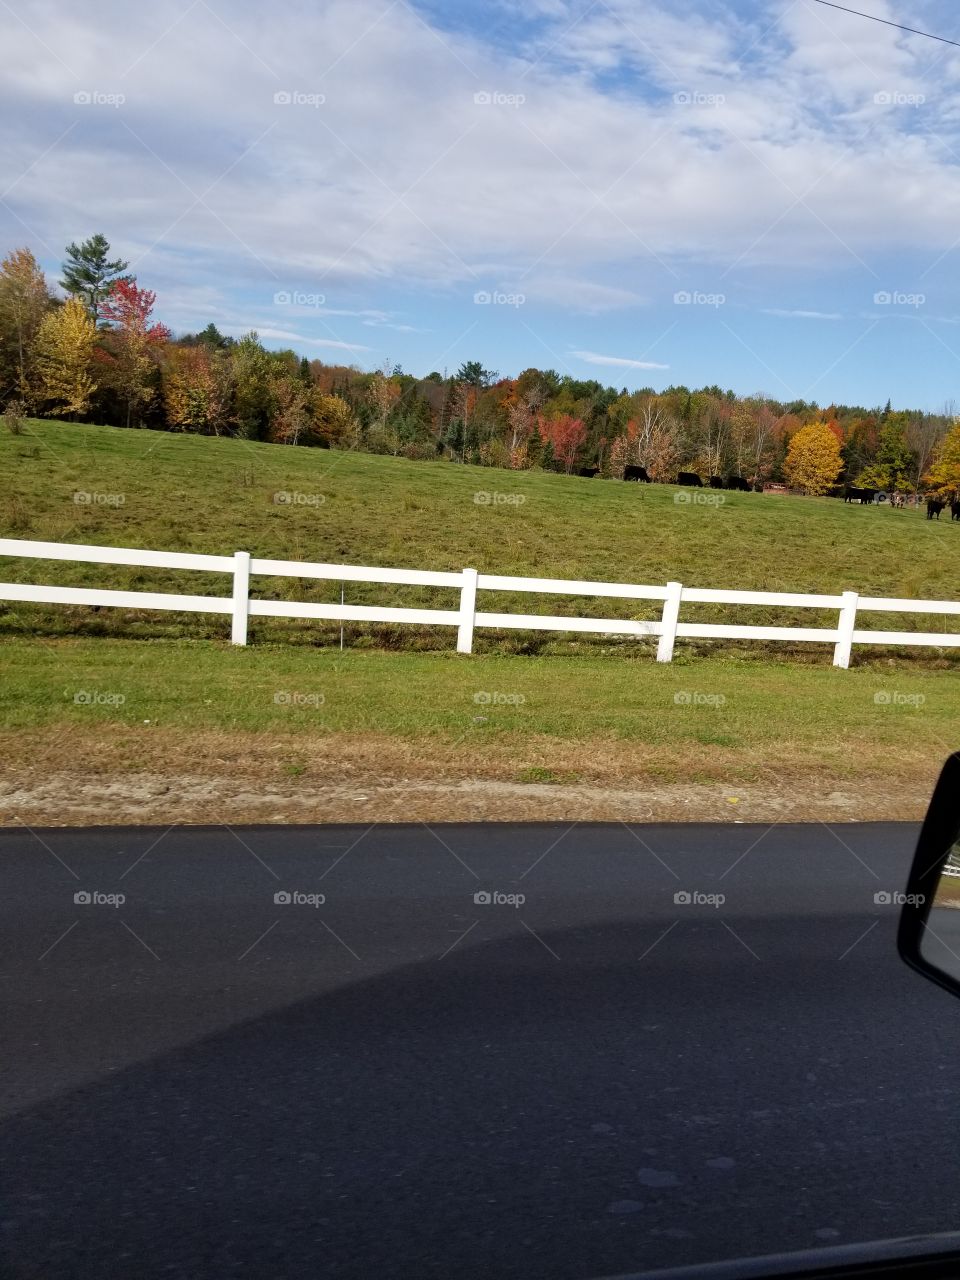 A beautiful fall landscape behind a white fence